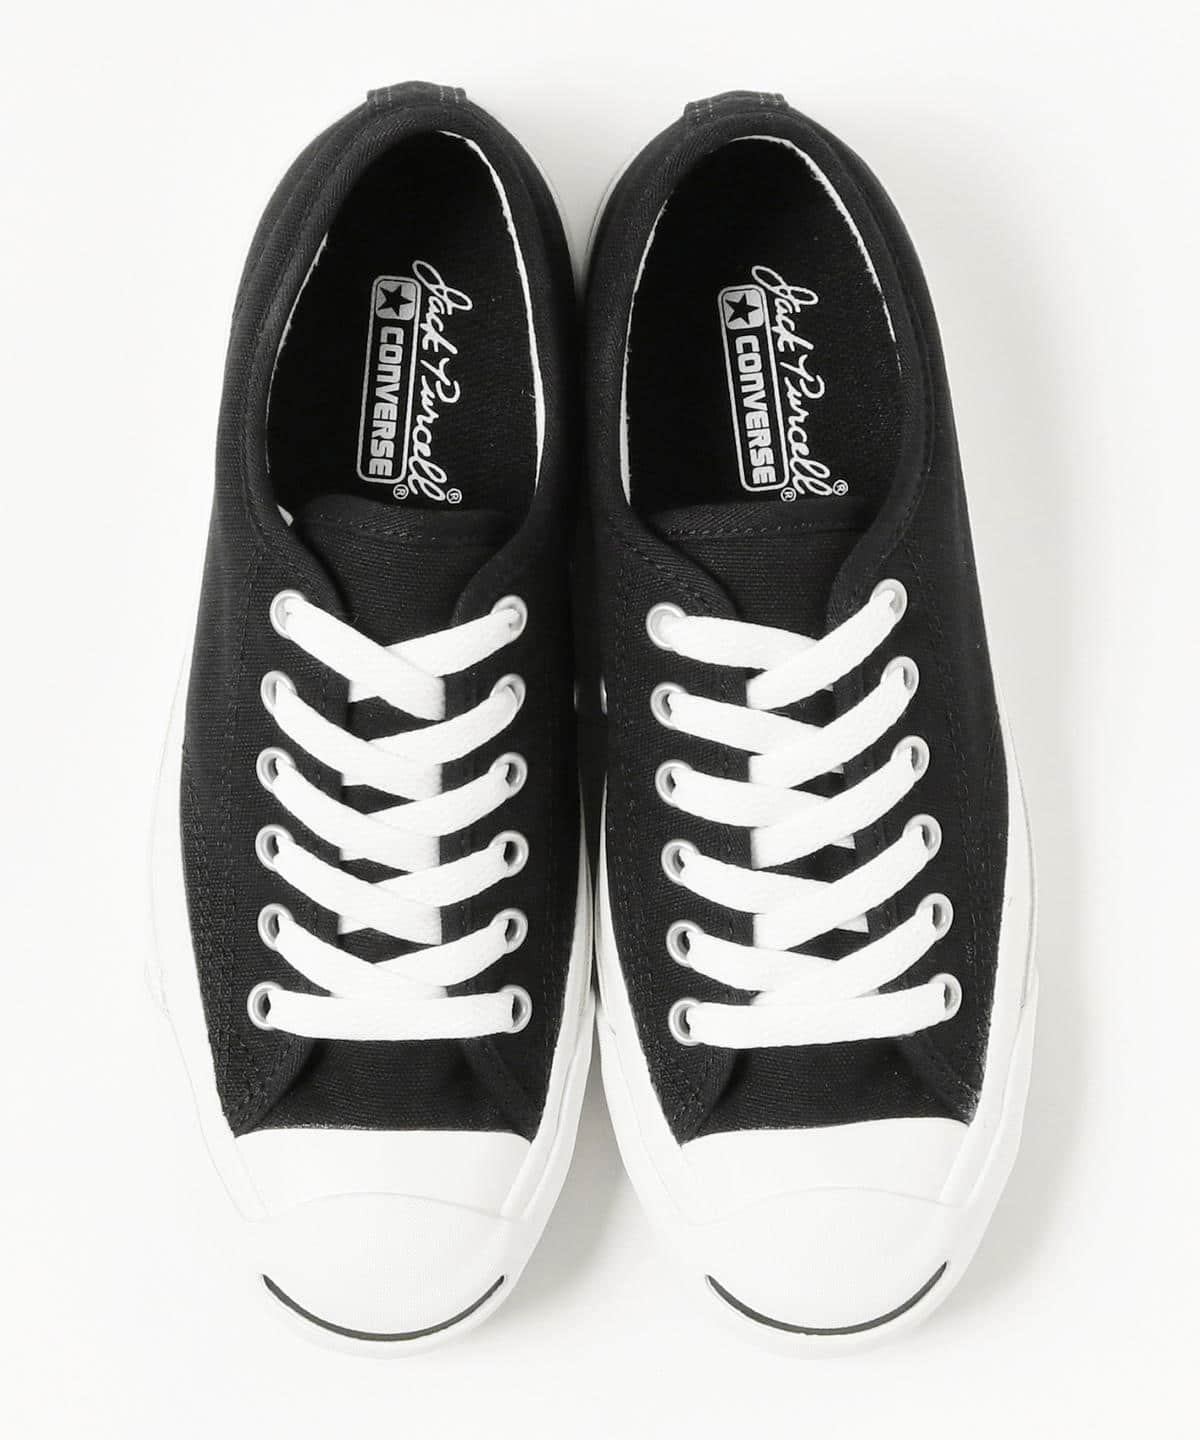 BEAMS BOY BEAMS BOY CONVERSE Jack Purcell (shoes sneakers) mail 